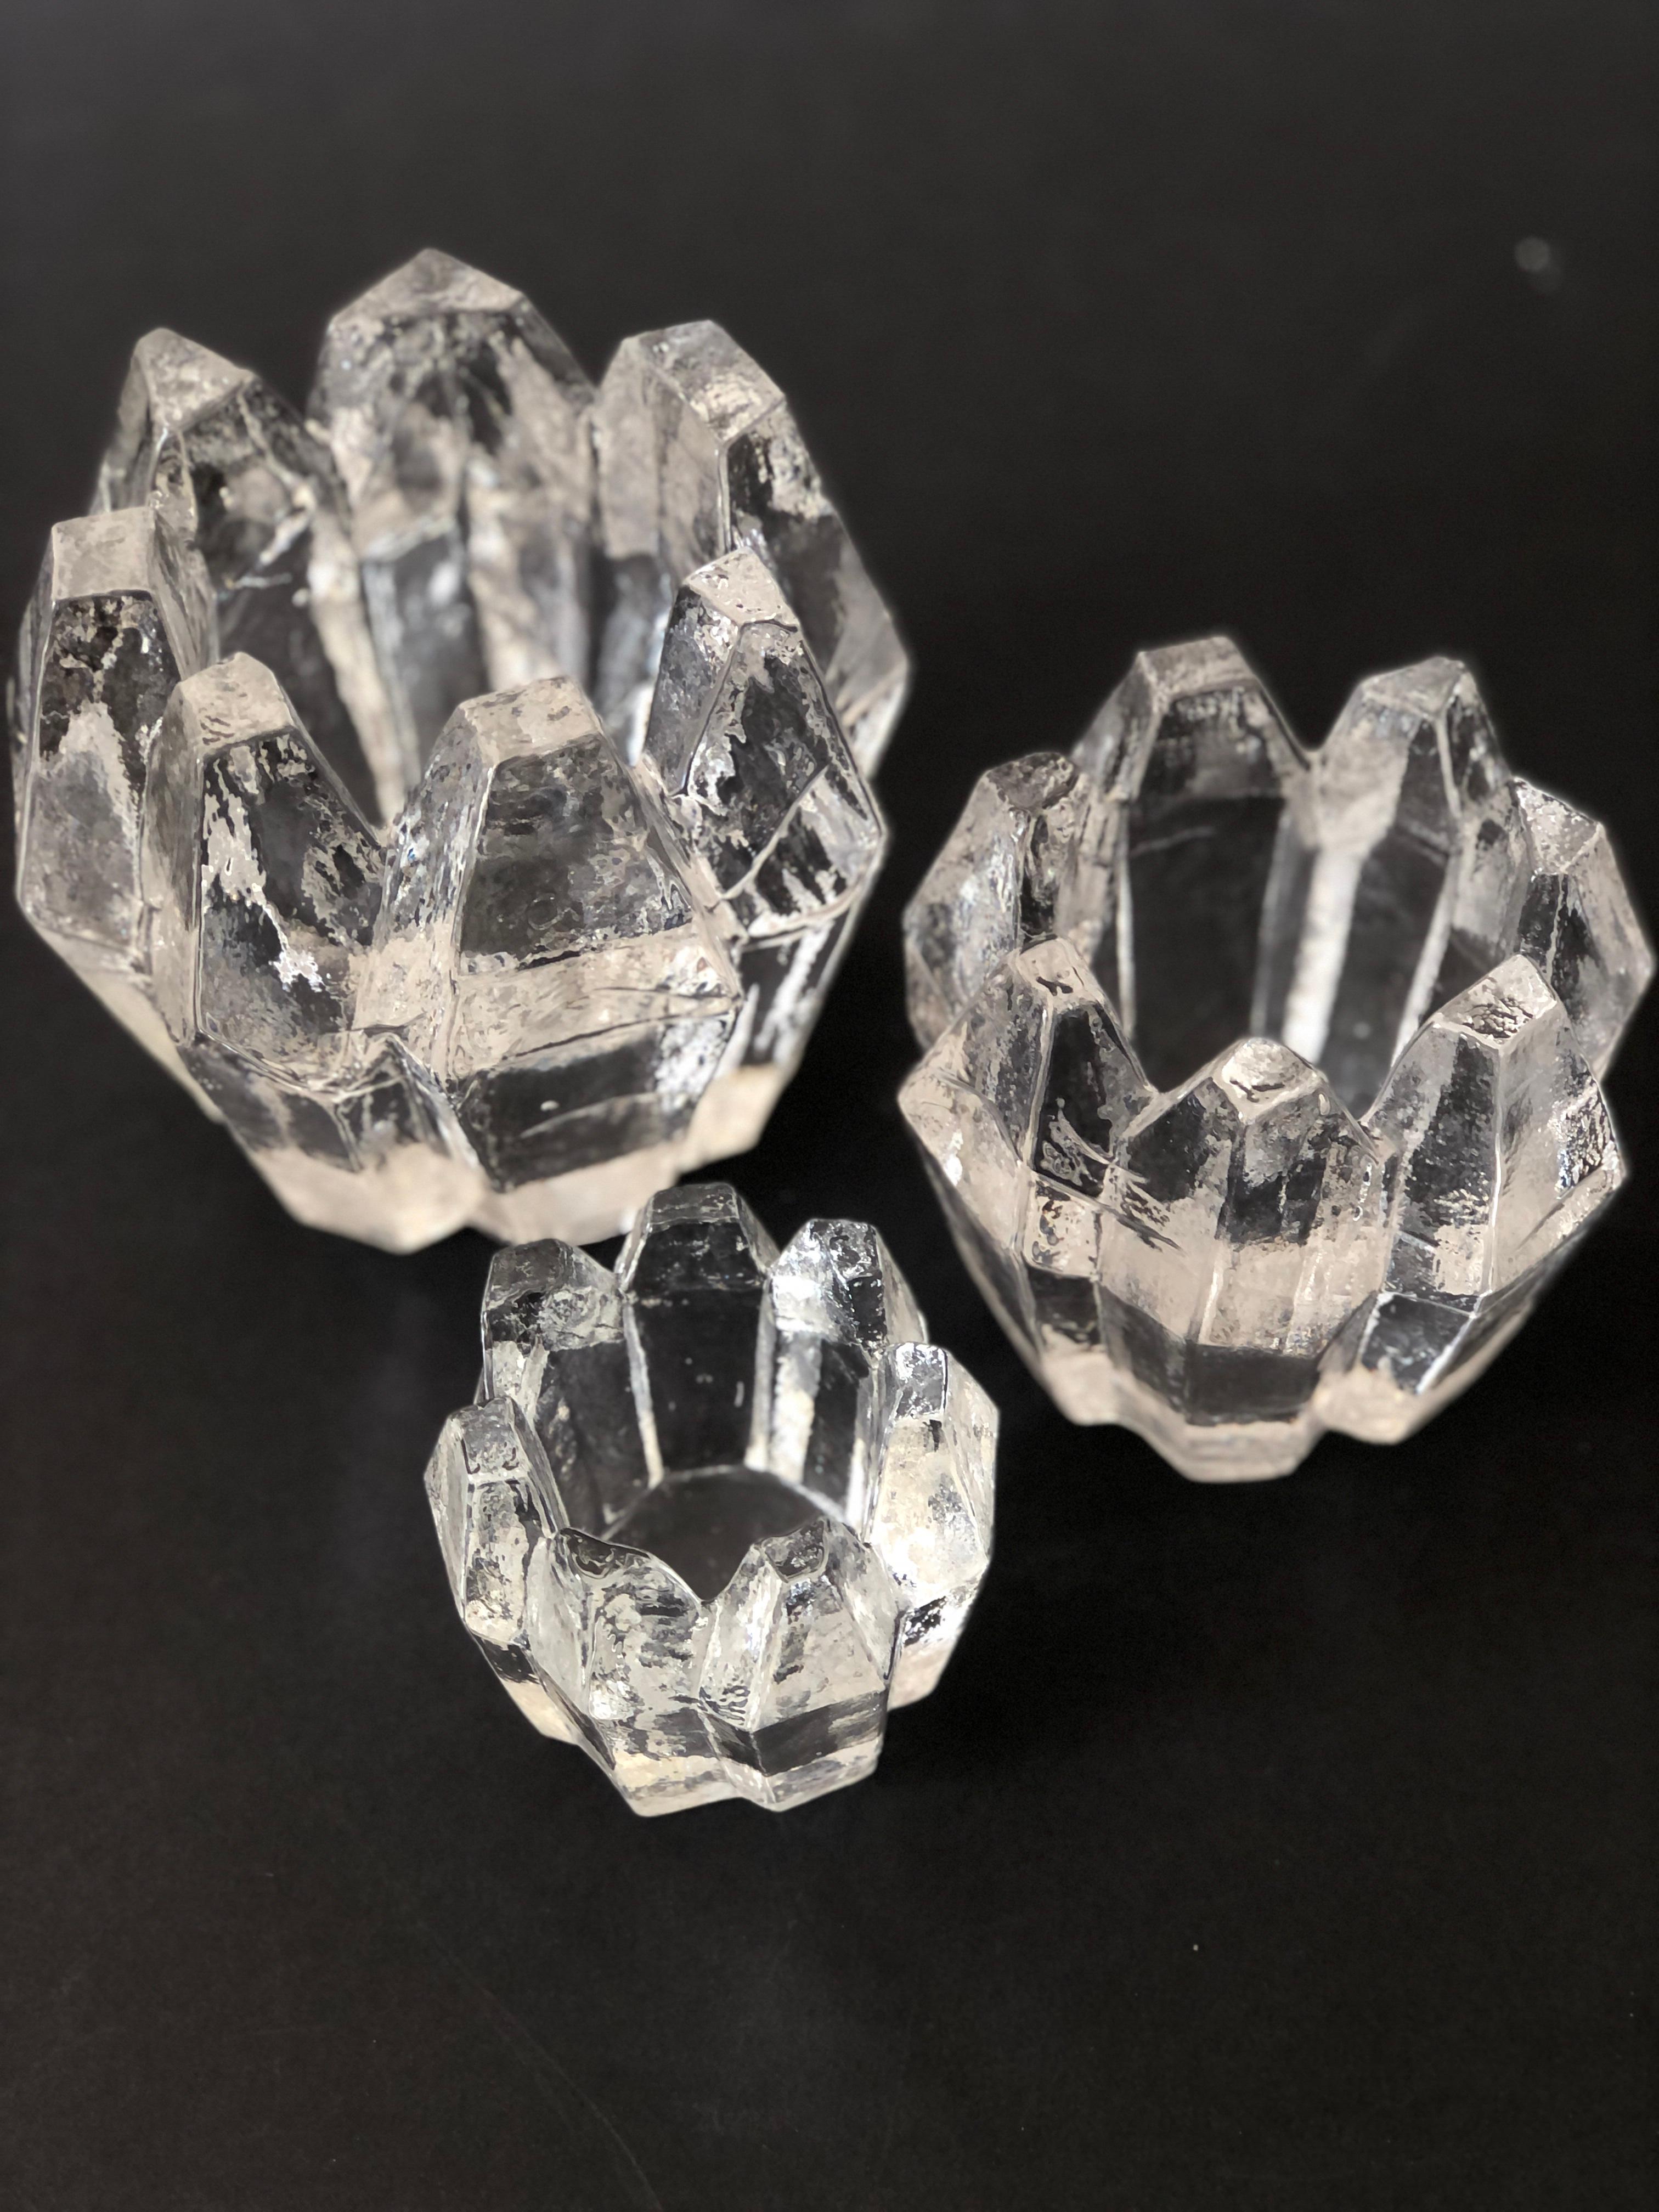 Set of 3 Candle Holders in full Chrystal Glass by Christer Sjögren for Lindshammars Glasbruk, Sweden. The two larger ones are signed by the artist, Christer Sjögren. Fitting for tea lights. These Brutalist 1960s candle holders came in three sizes